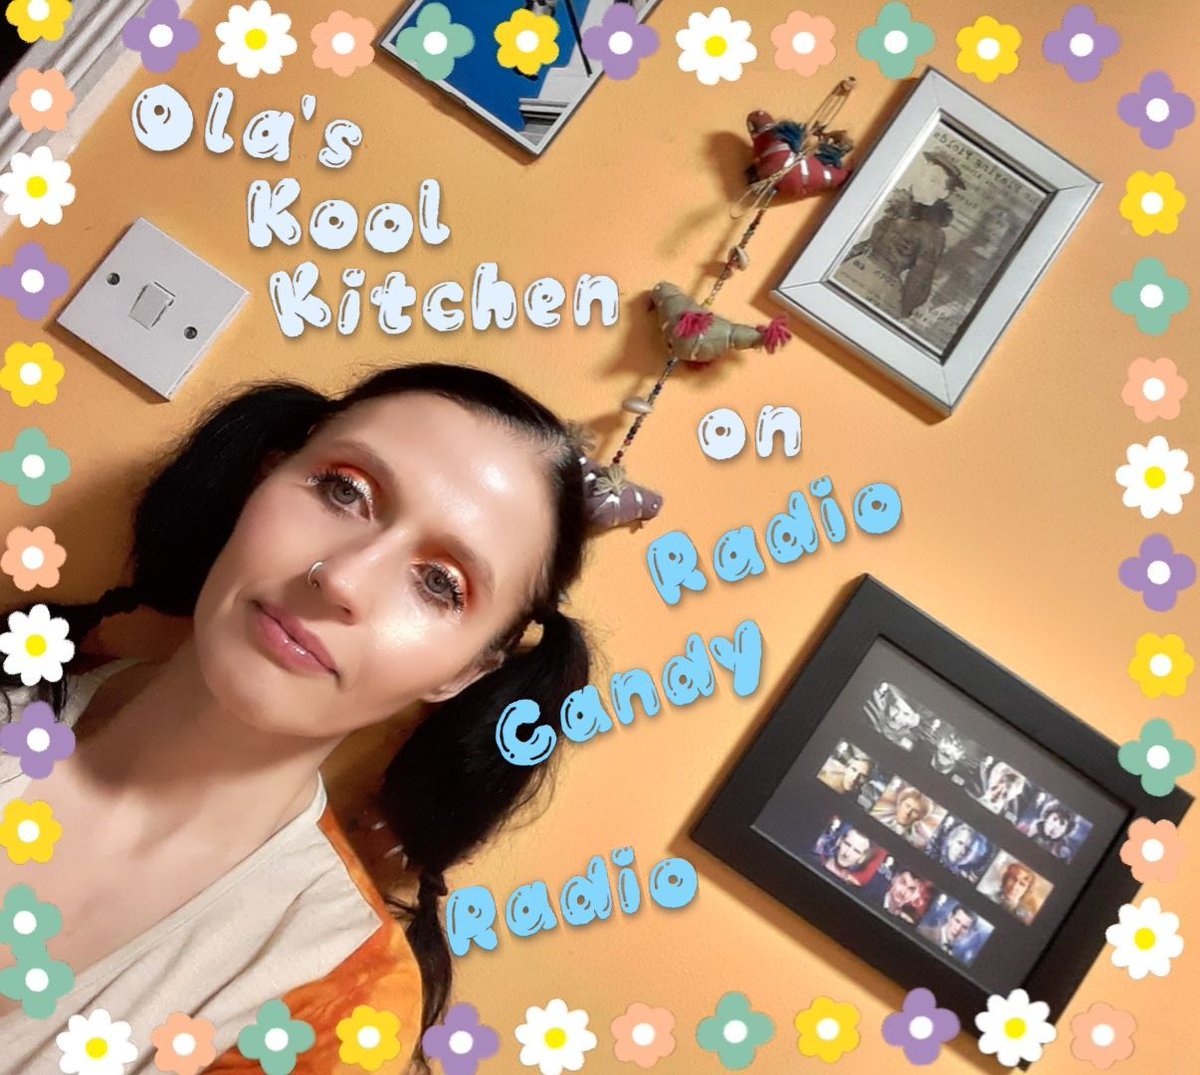 @OlasKoolKitchen NOW on #radiocandyRadio join me for my 500th show with @IrainaMancini @BandCorvair @MildredMaude @artmooremusic @thedartsUS @waterfromyreyes & @__petiteamie buff.ly/3kN9kX5